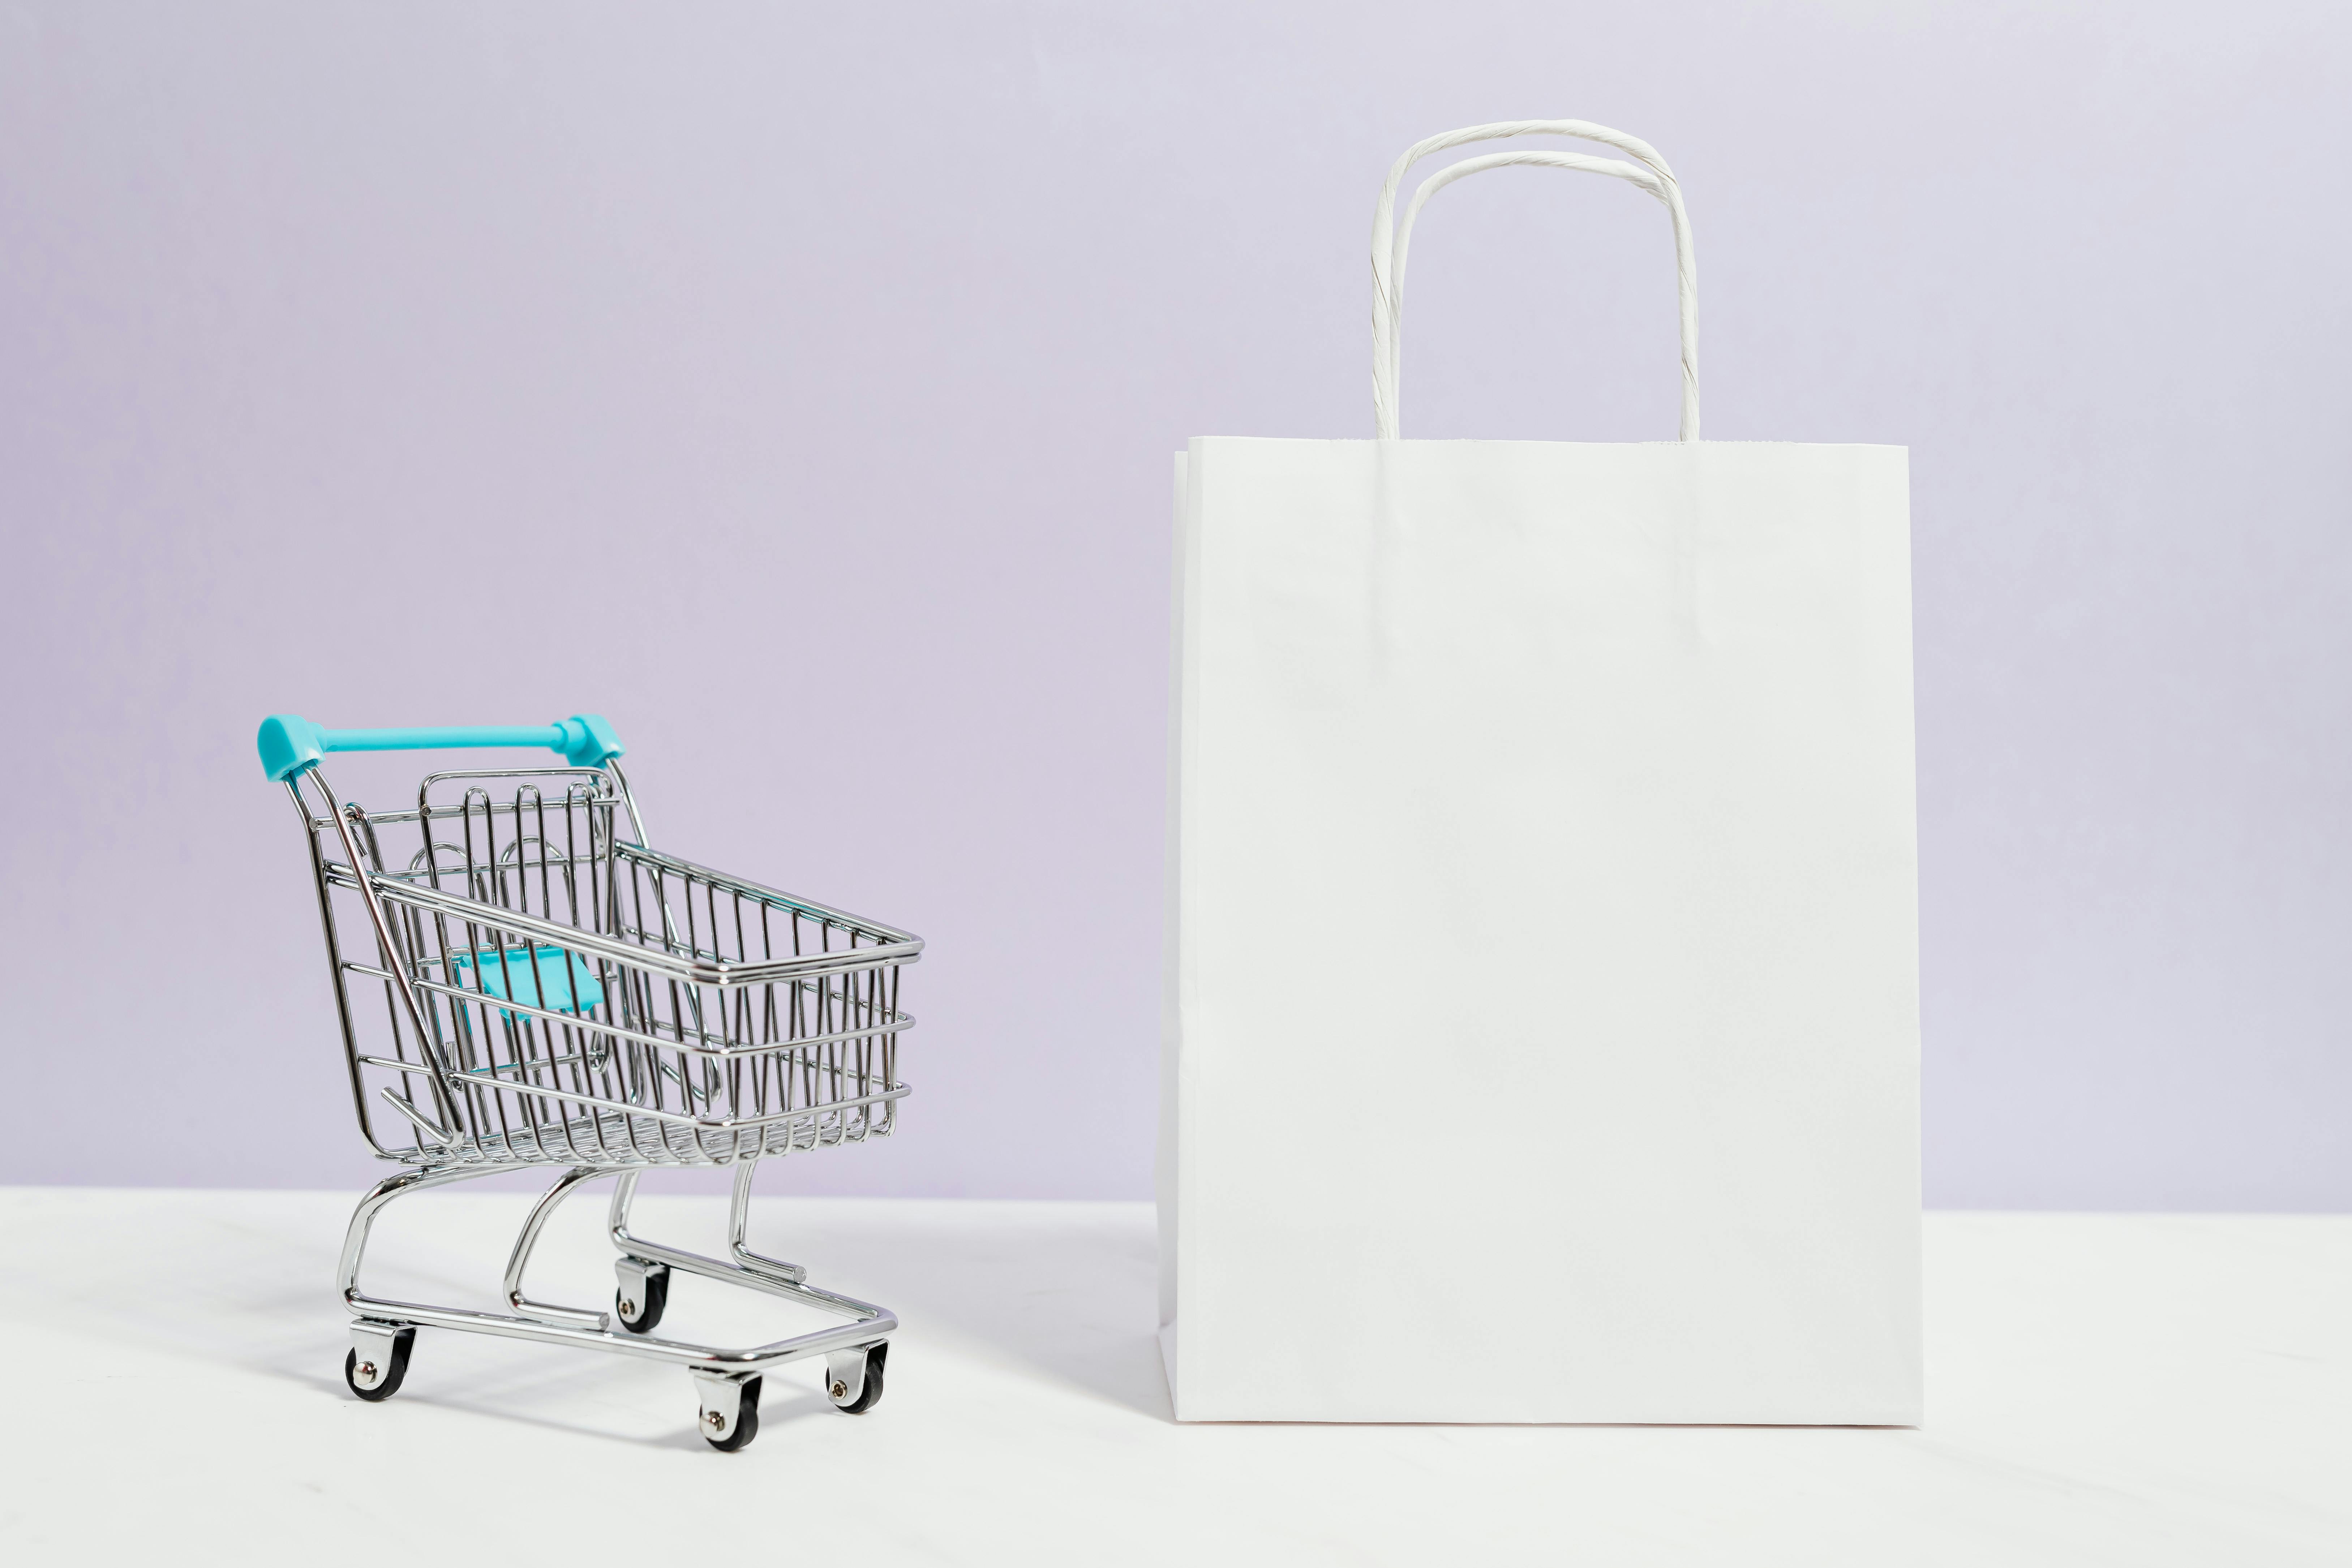 Shopping Photos, Download The BEST Free Shopping Stock Photos & HD Images